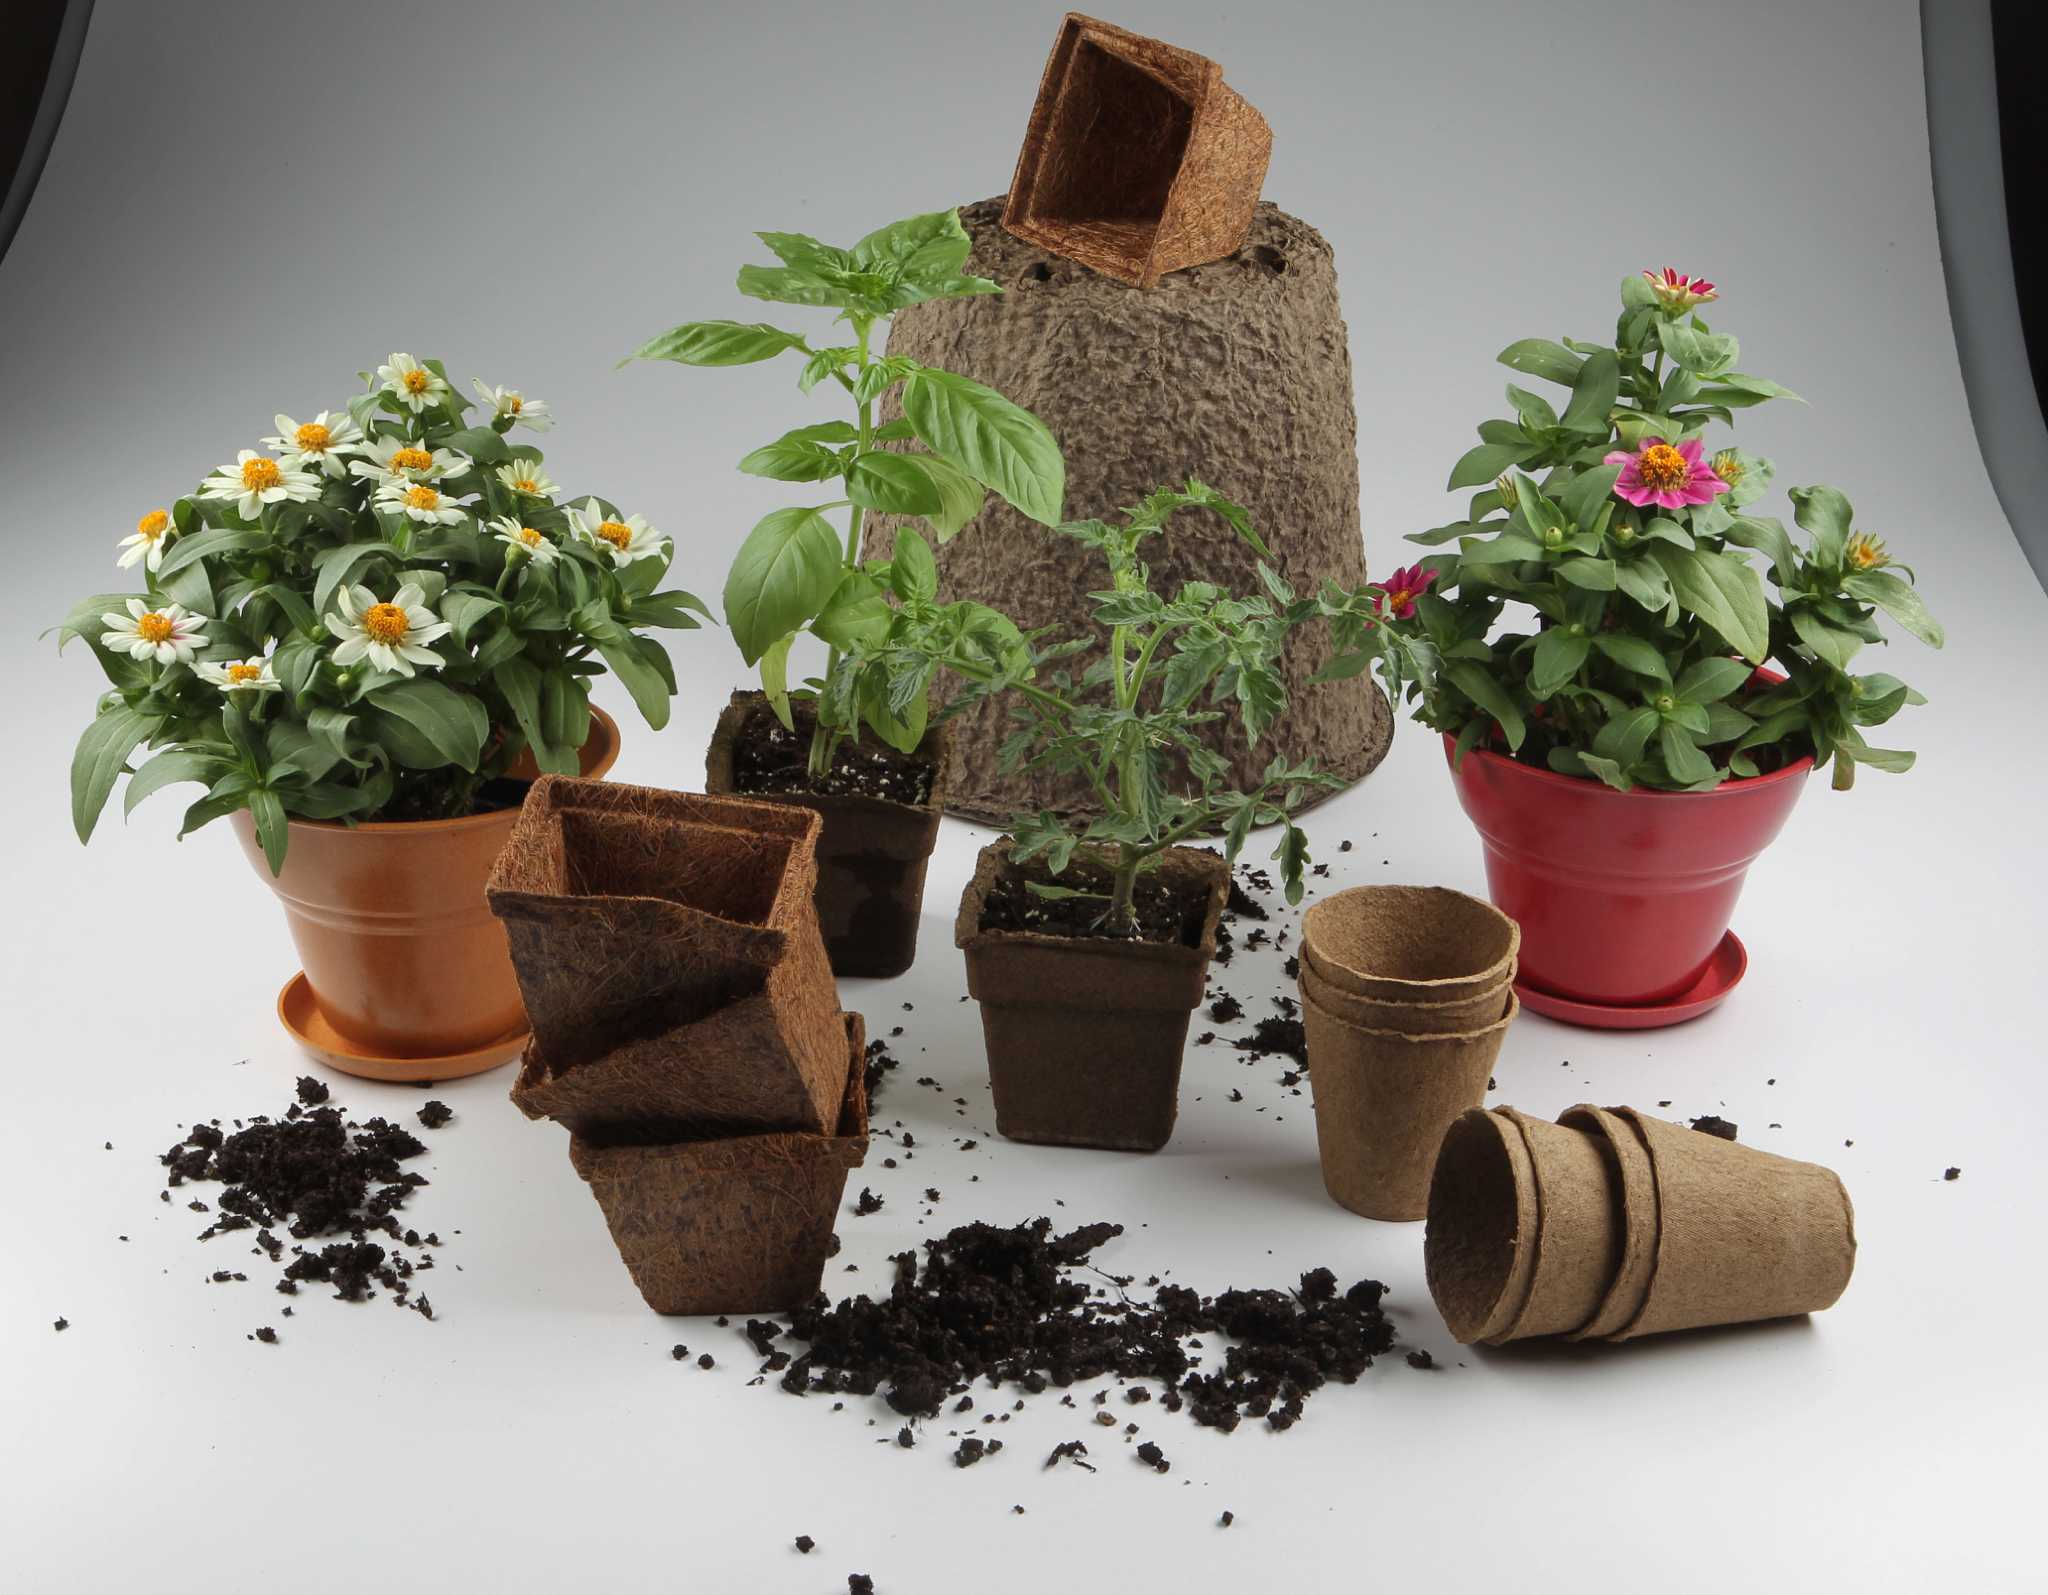 10 of the Best Eco-Friendly Plant Pots